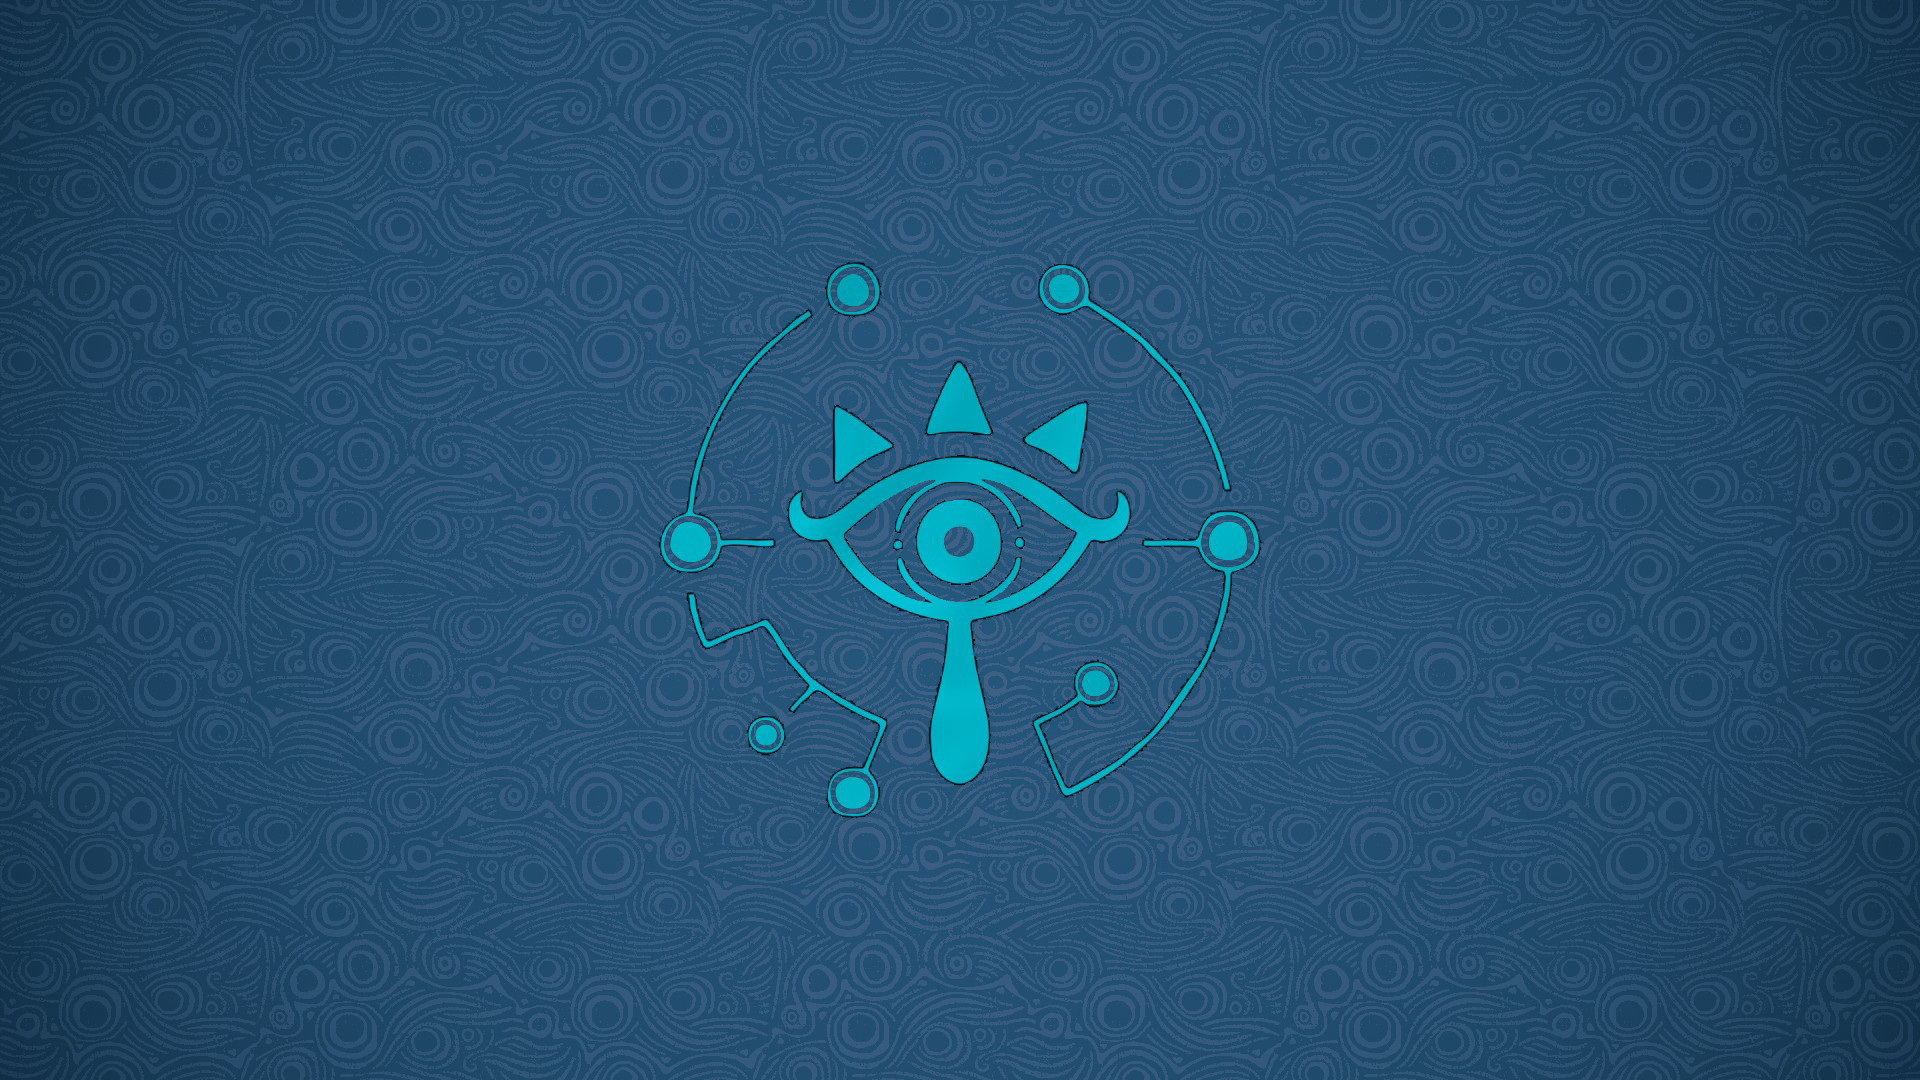 1920x1080 ArtREQUEST: Can someone make a wallpaper with the Sheikah Symbol and the  Swirl Background, sort of like this?